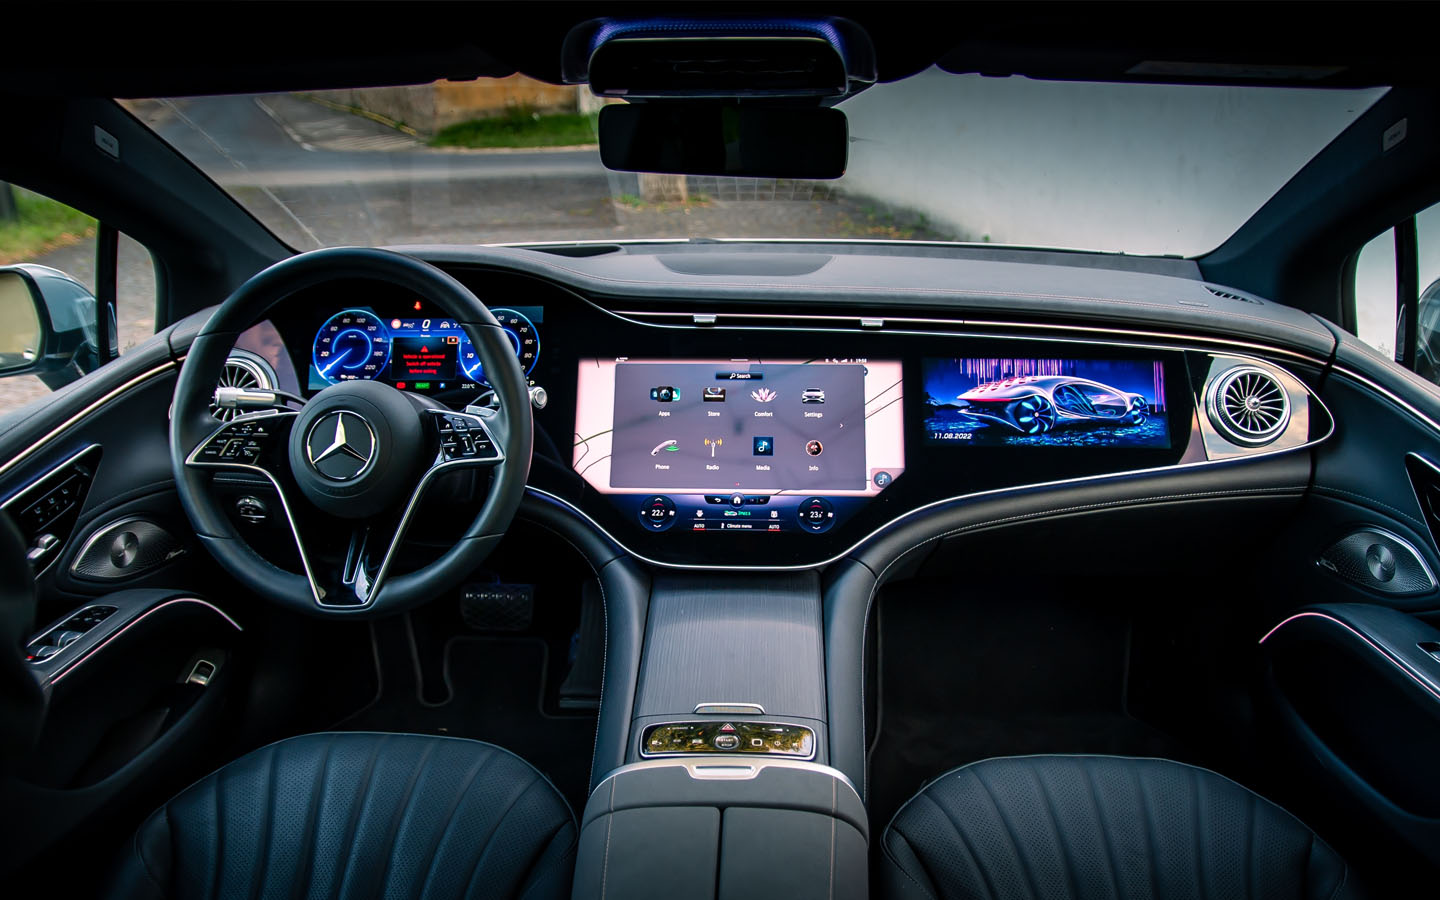 cars with the biggest screens: Mercedes Benz interior